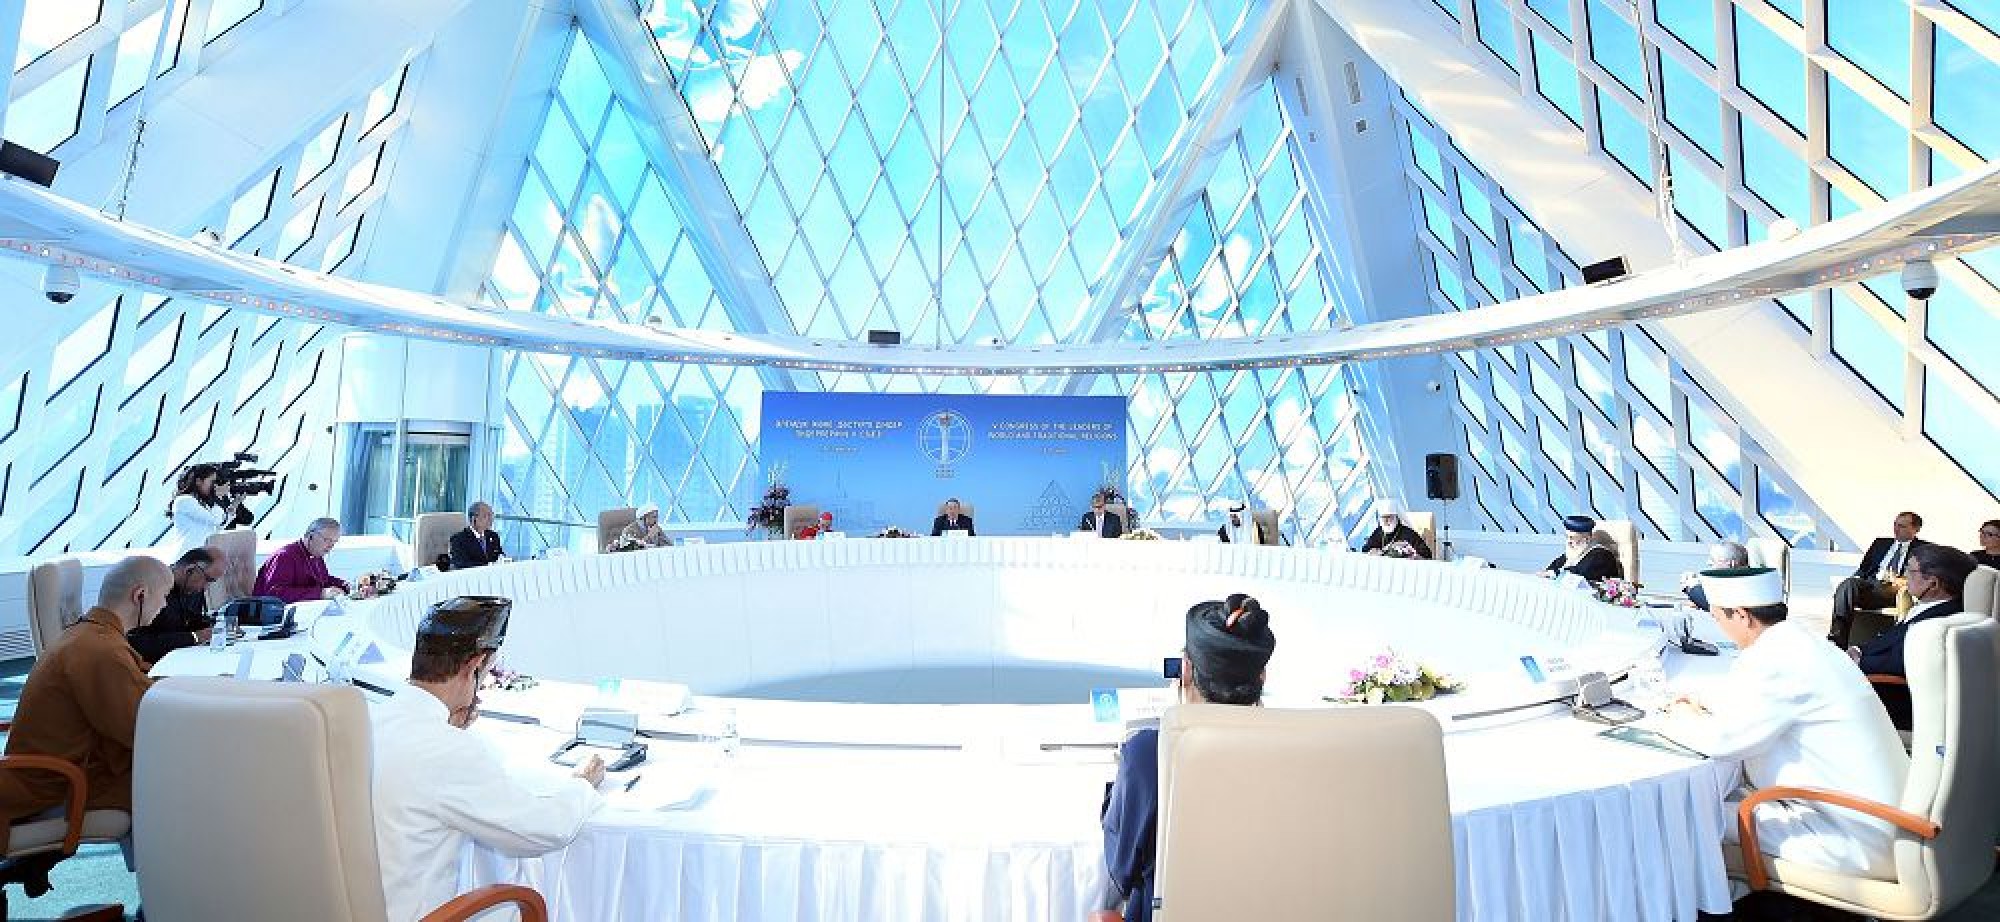 VI Congress of Leaders of World and Traditional Religions starts in Astana